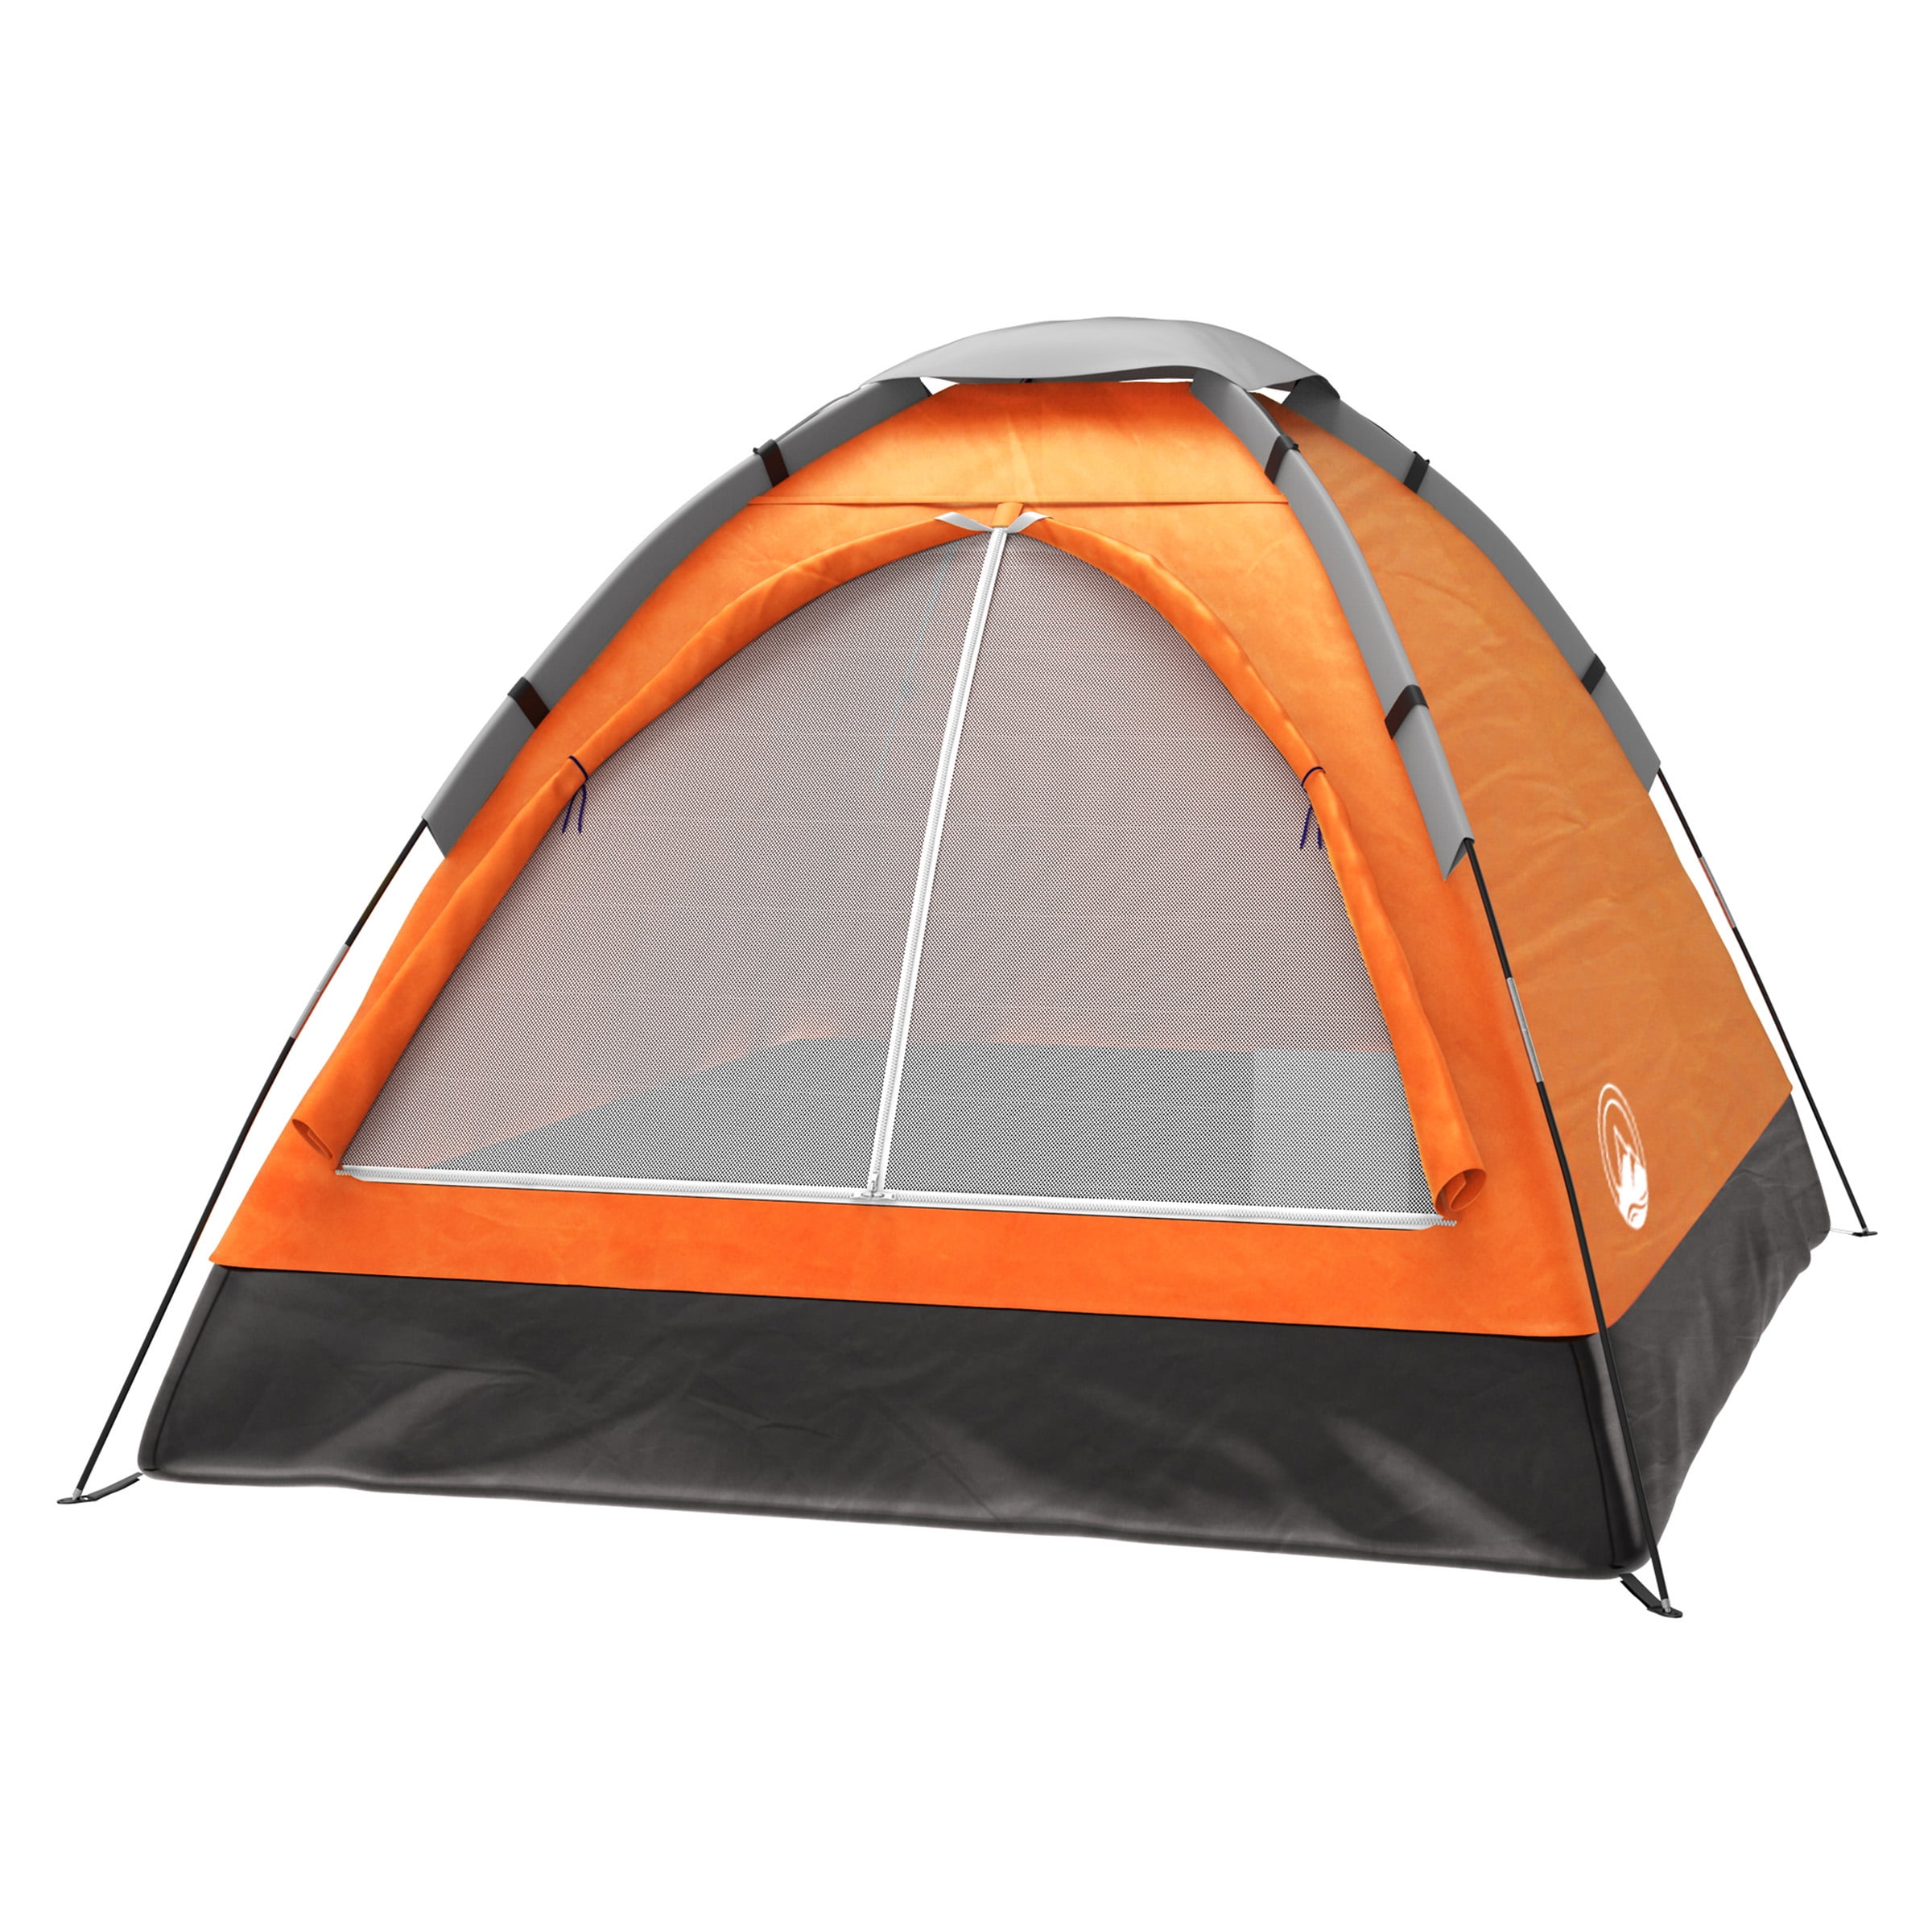 2-Person Camping Tent ? Includes Rain Fly and Carrying Bag